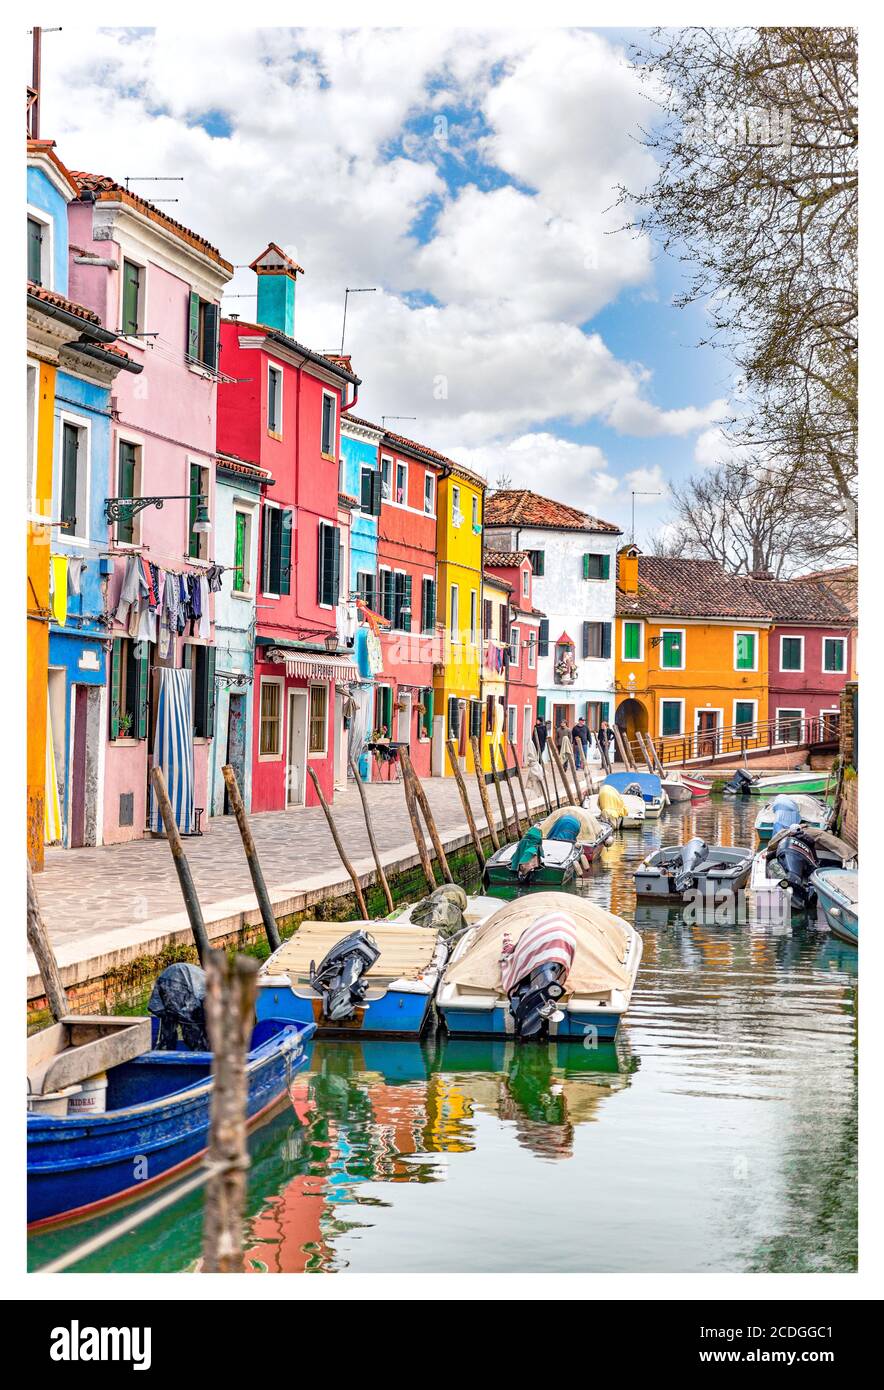 Venice photography in high quality Stock Photo